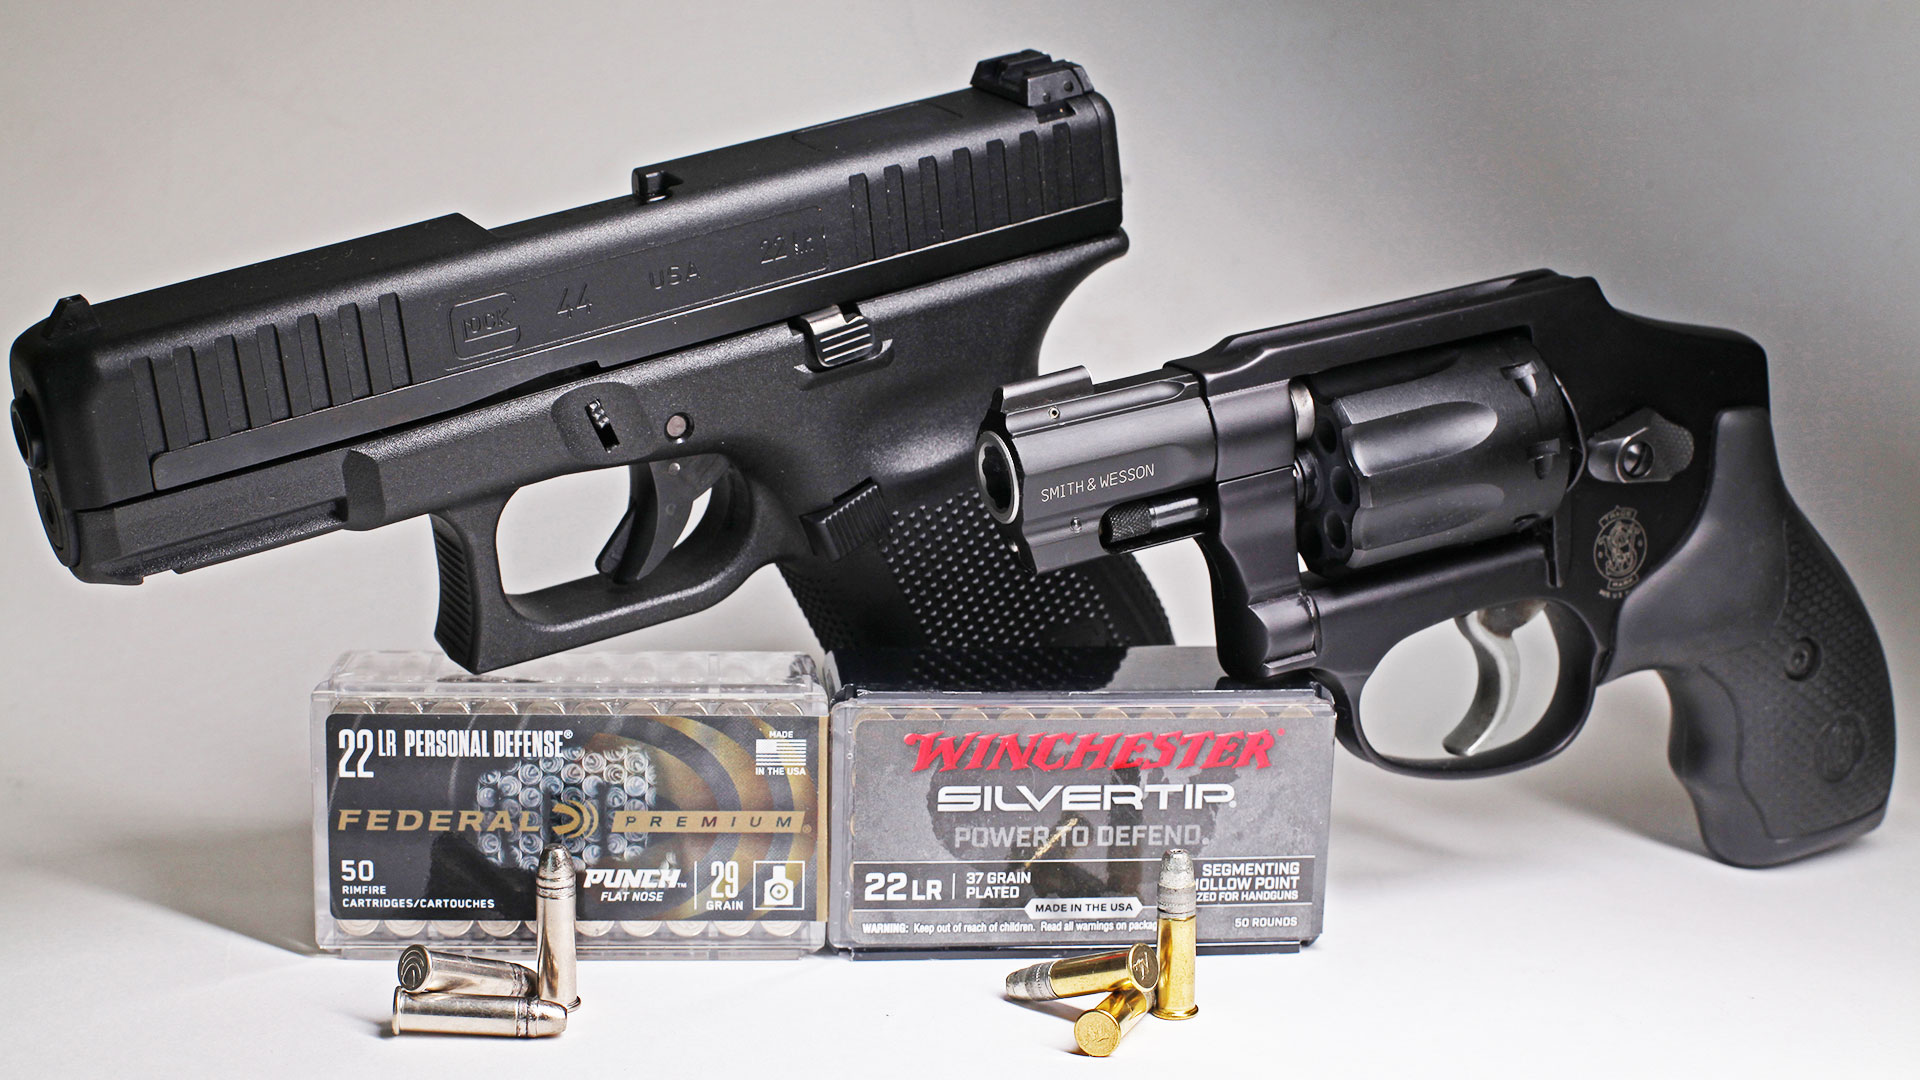 Why is the 22LR the preferred pistol cartridge for most suppressed  applications? Is there any benefit the 22 LR offers in a silenced firearm  which the 9mm or 45ACP cannot? - Quora